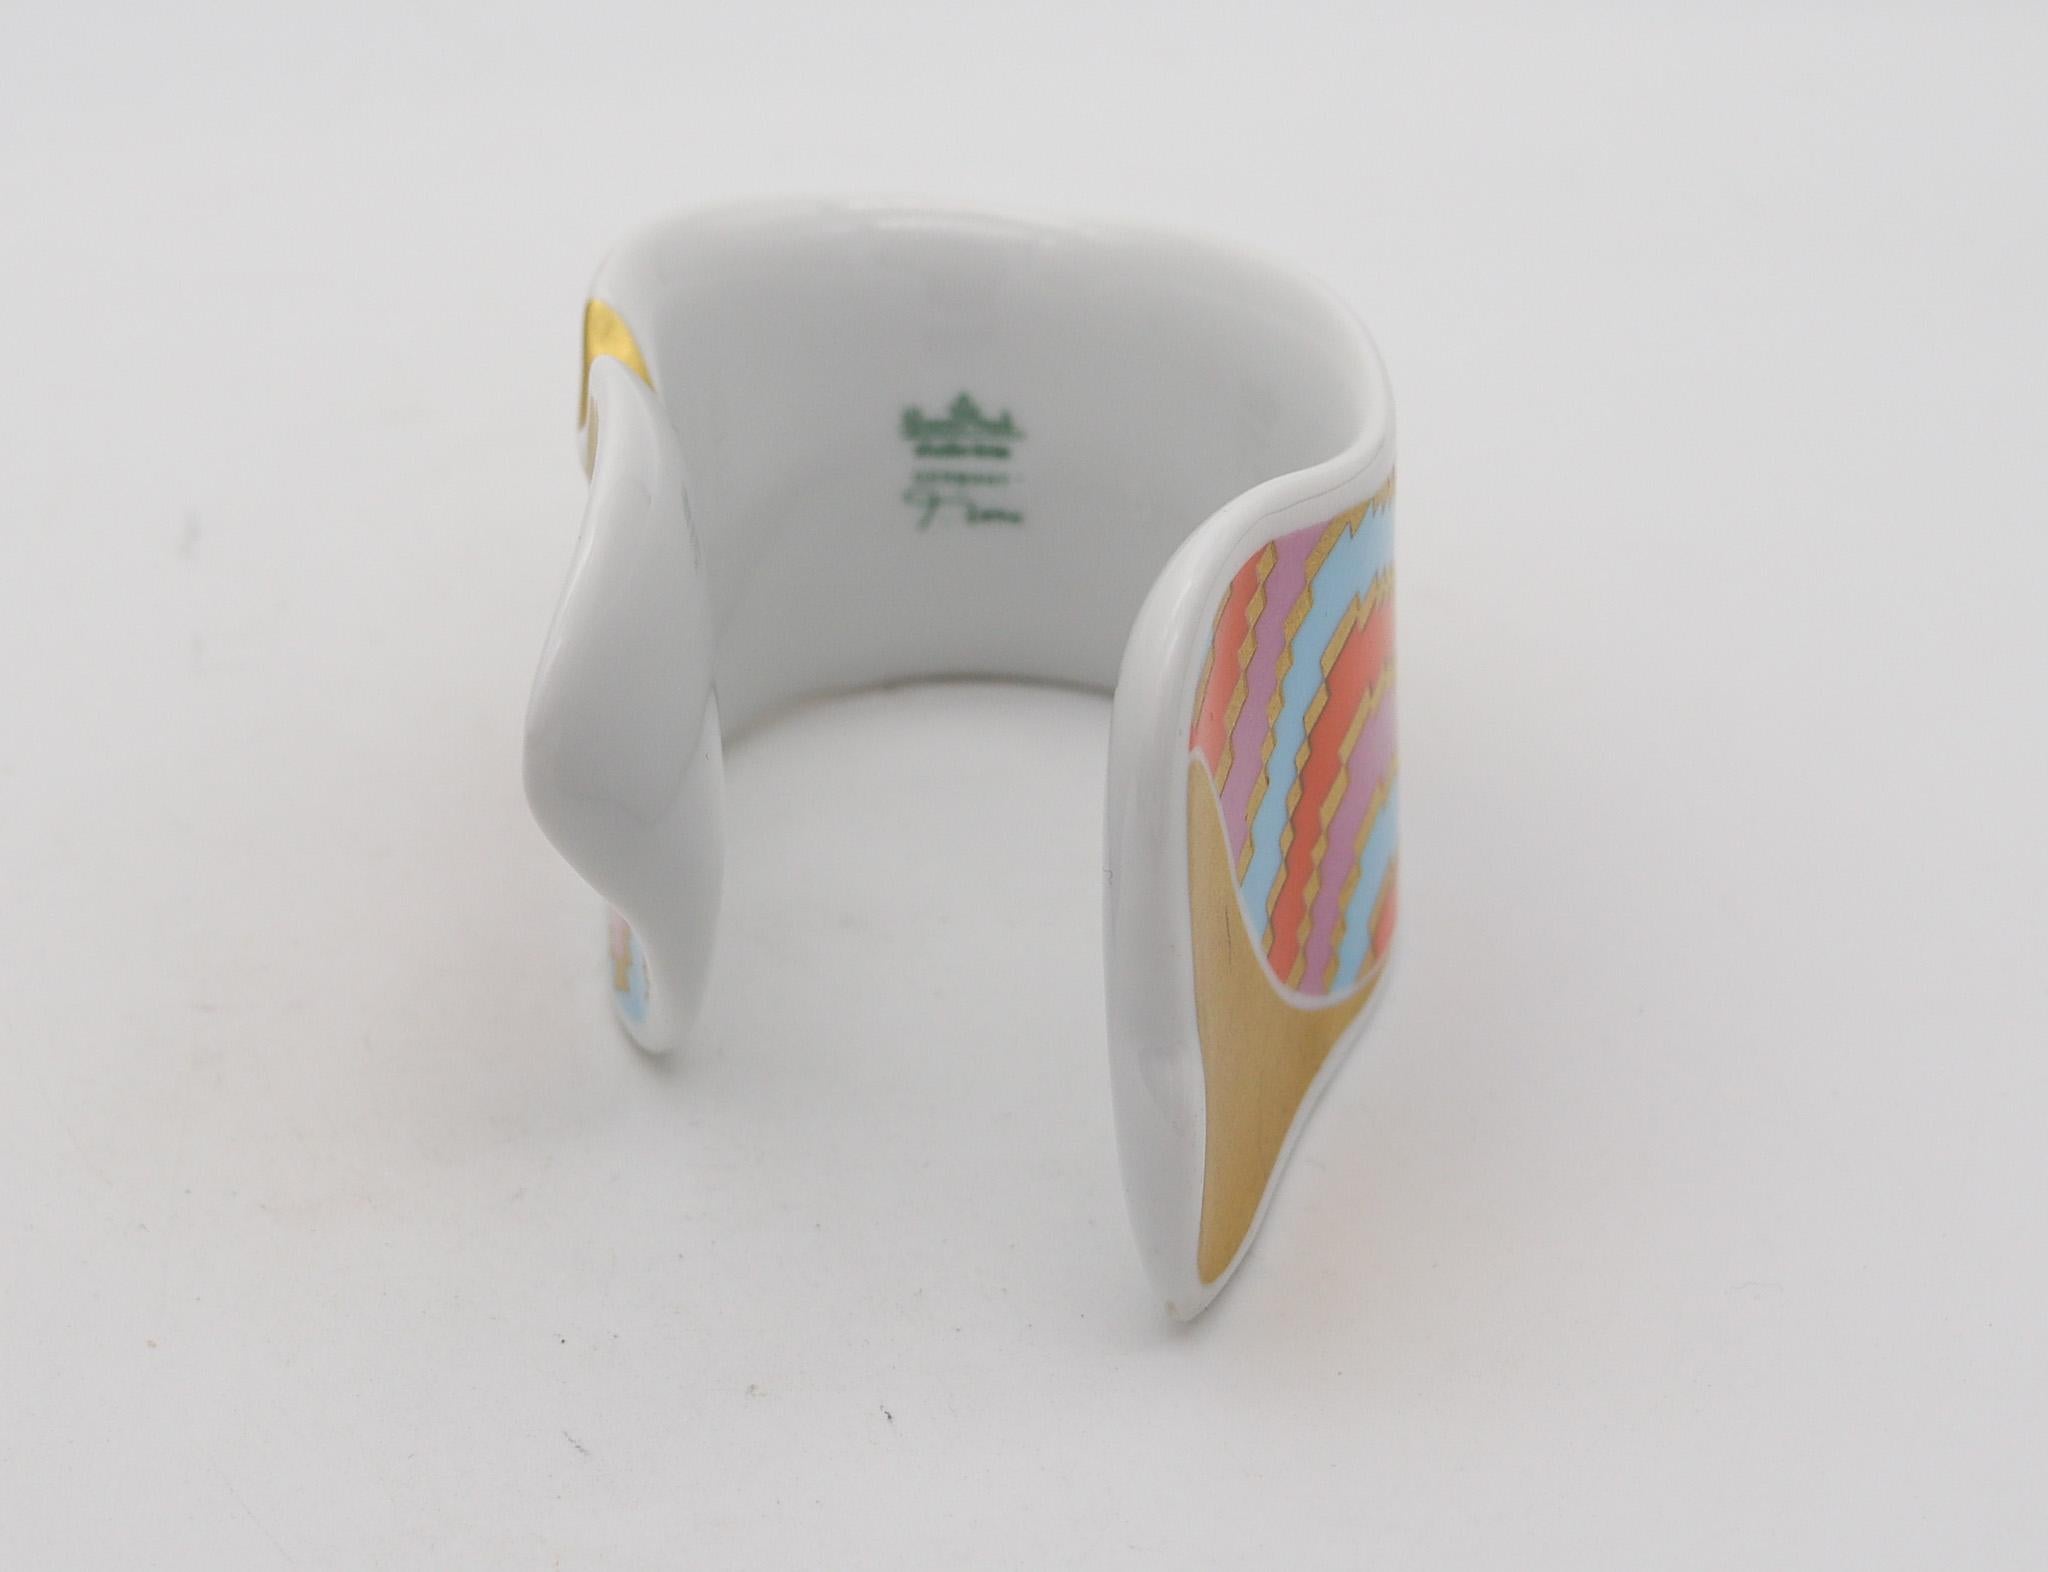 Rosenthal 1970 Johan Gerard van Loon Studio Line Cuff-Arm Bracelet In Porcelain In Excellent Condition For Sale In Miami, FL